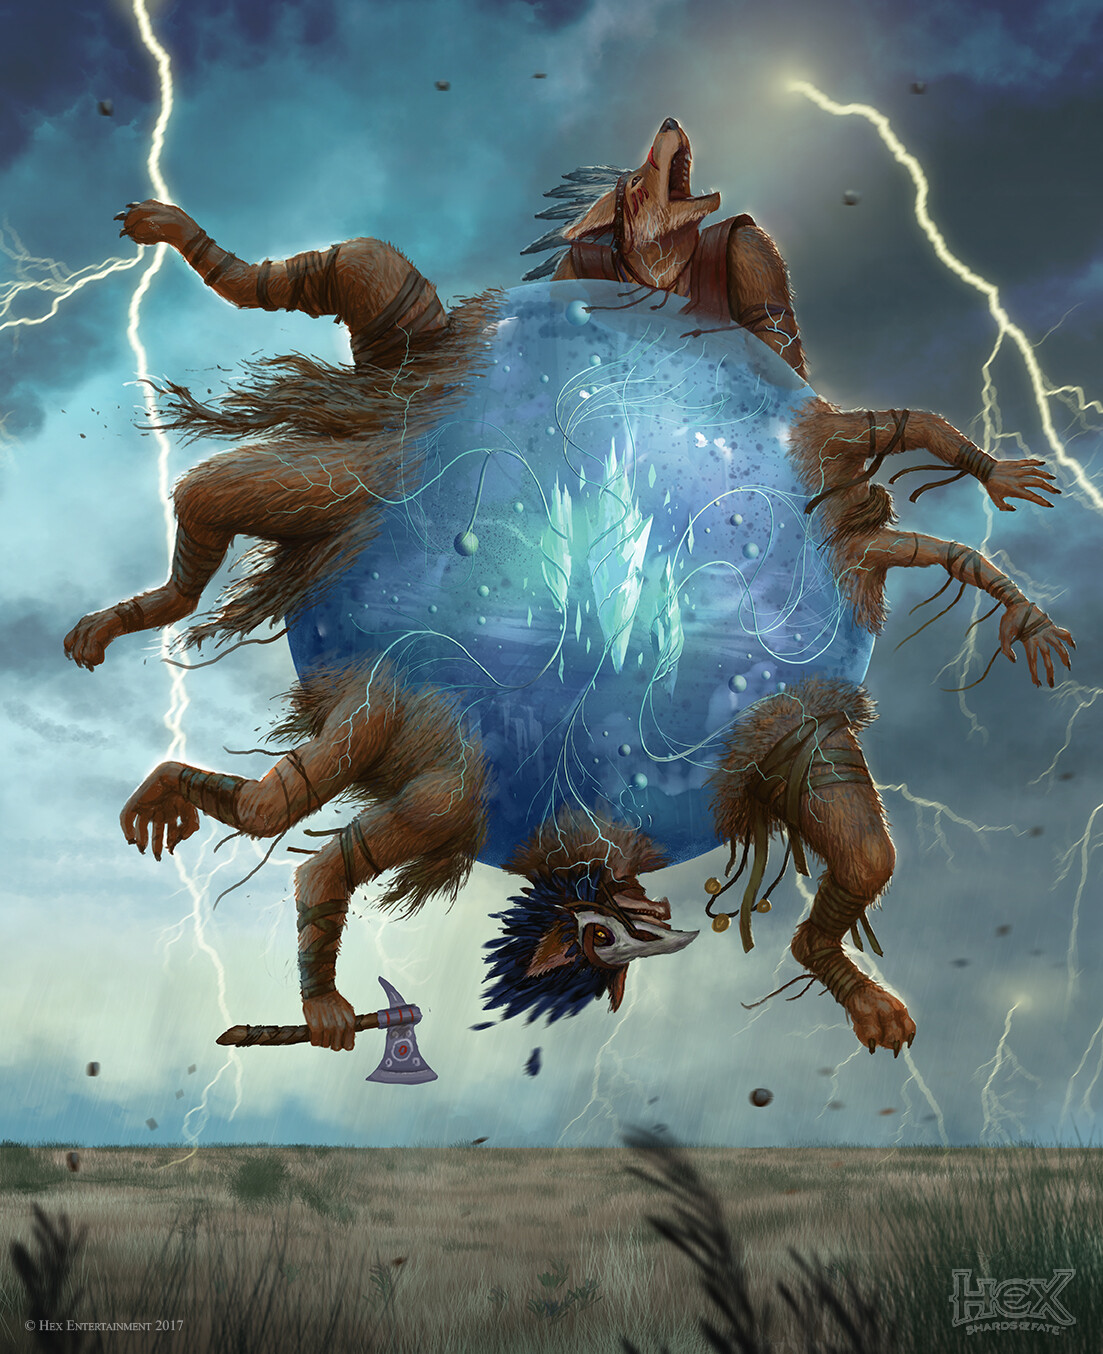 Stormsight Apocalyte.
Card art for HEX. Apocalytes are spherical gelatinois alien bizarre beings that kills and collects parts of other beings, coyotles this time, whic is an iconic creature of this game, some sort of anthropomorphic coyotes.